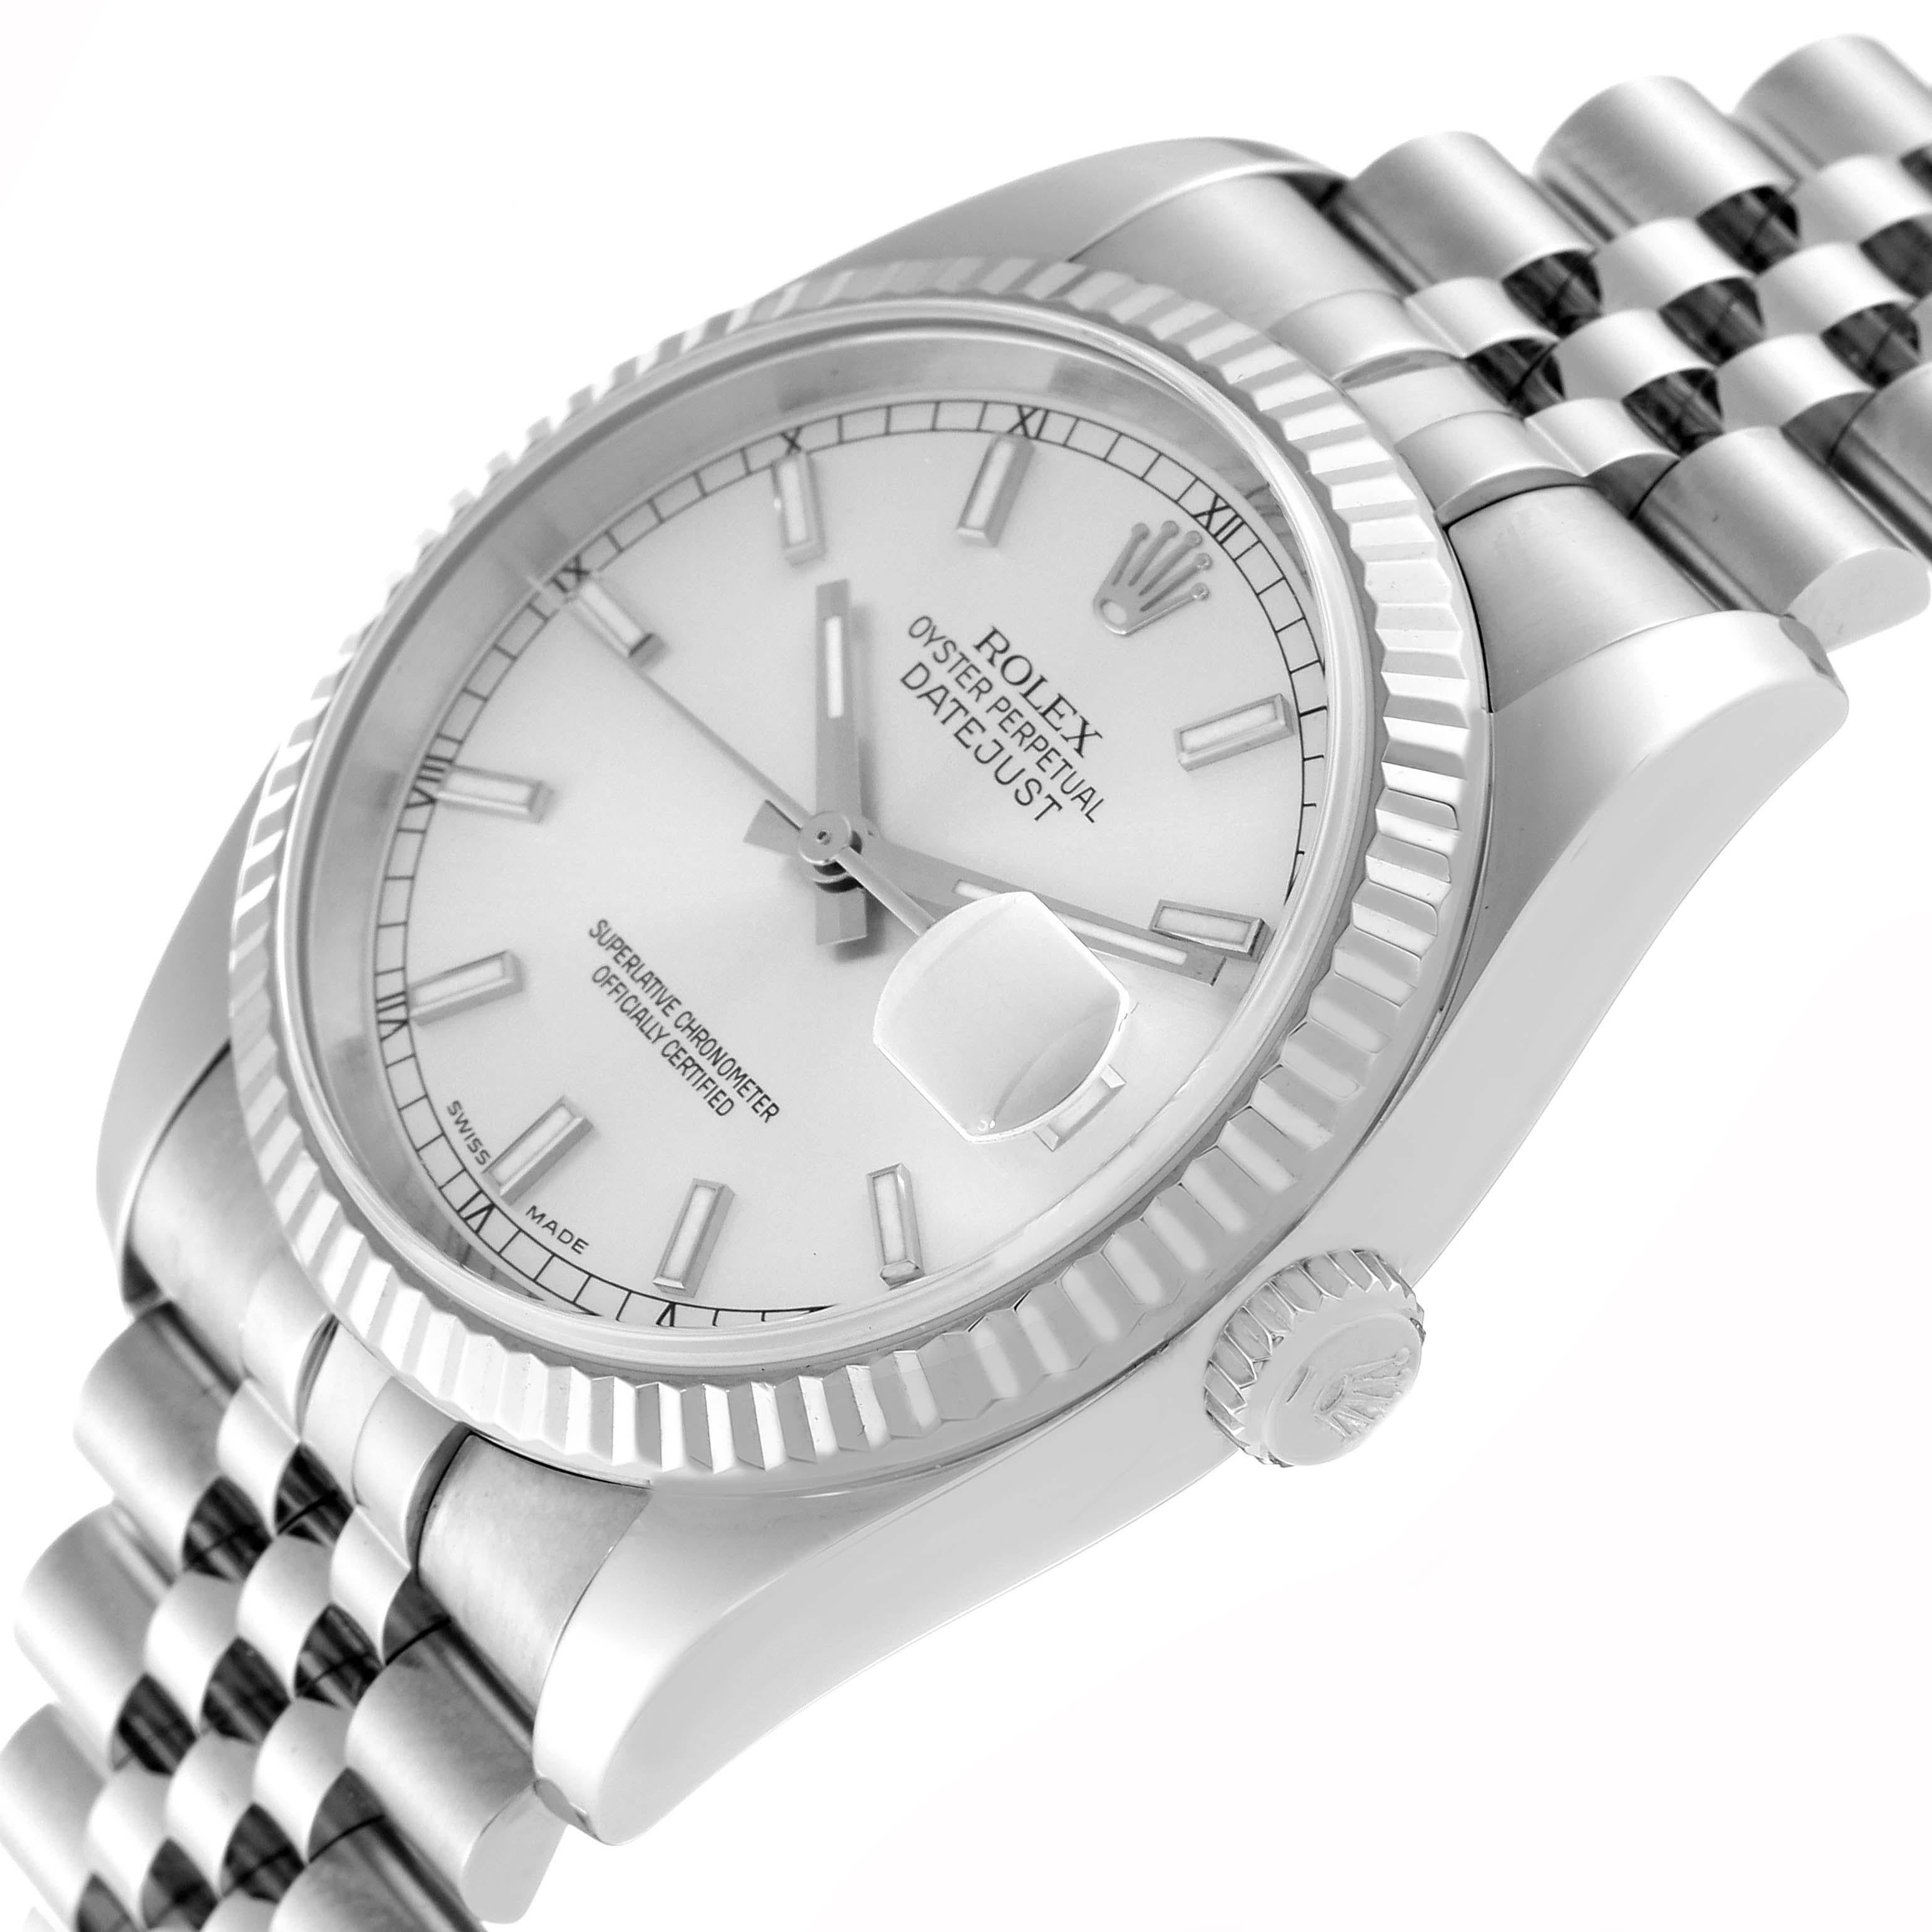 Rolex Datejust Steel White Gold Silver Dial Mens Watch 116234 Box Papers en vente 1